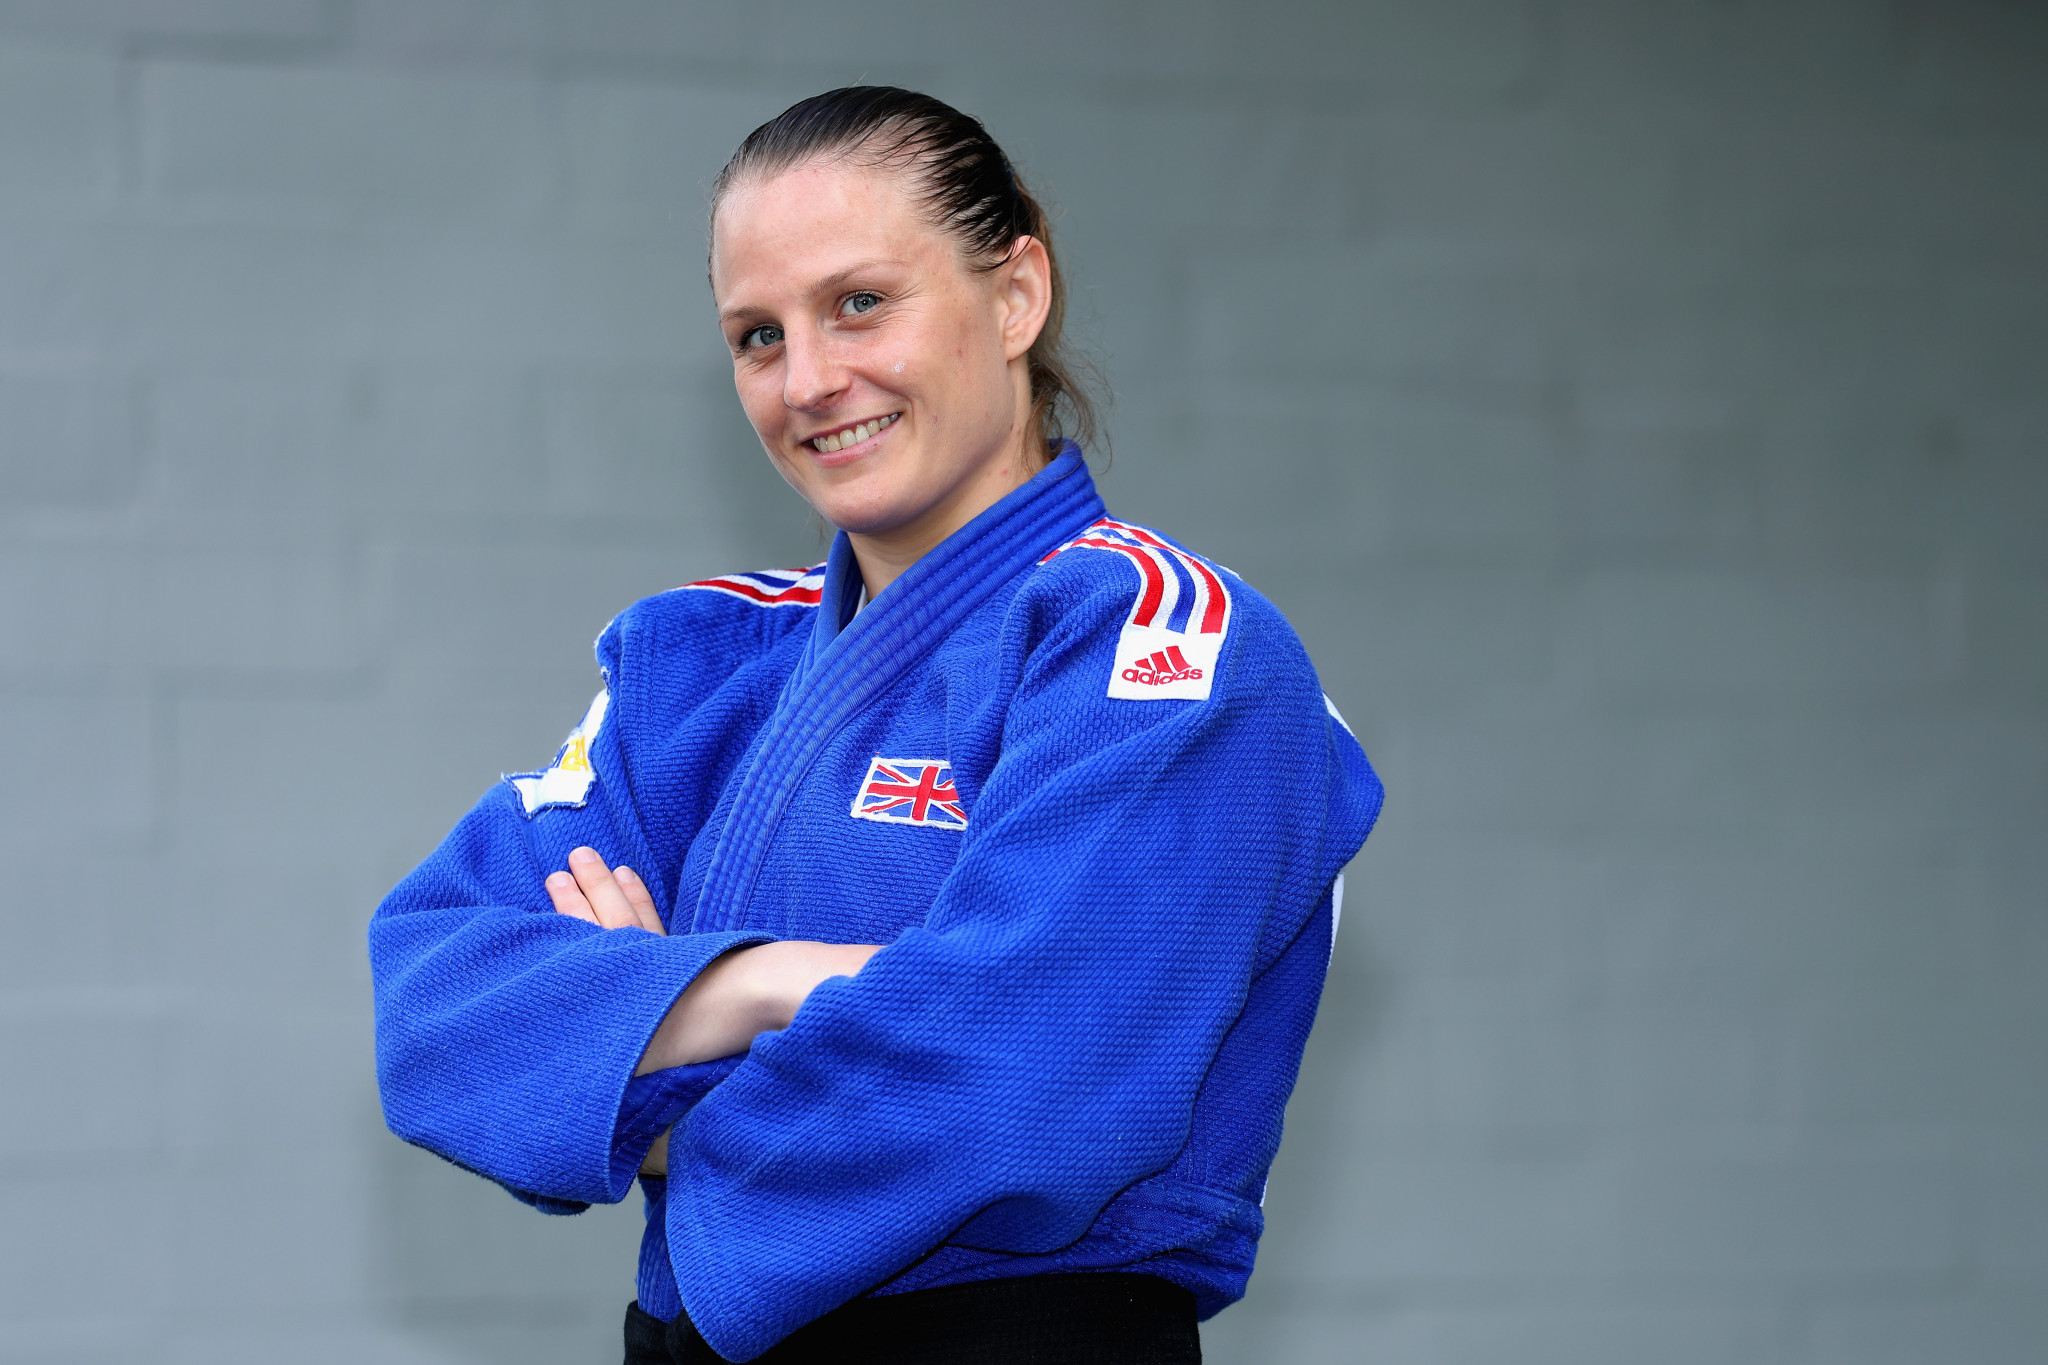 Judoka Alice Schlesinger has announced her retirement after competing at international level for 15 years ©Getty Images